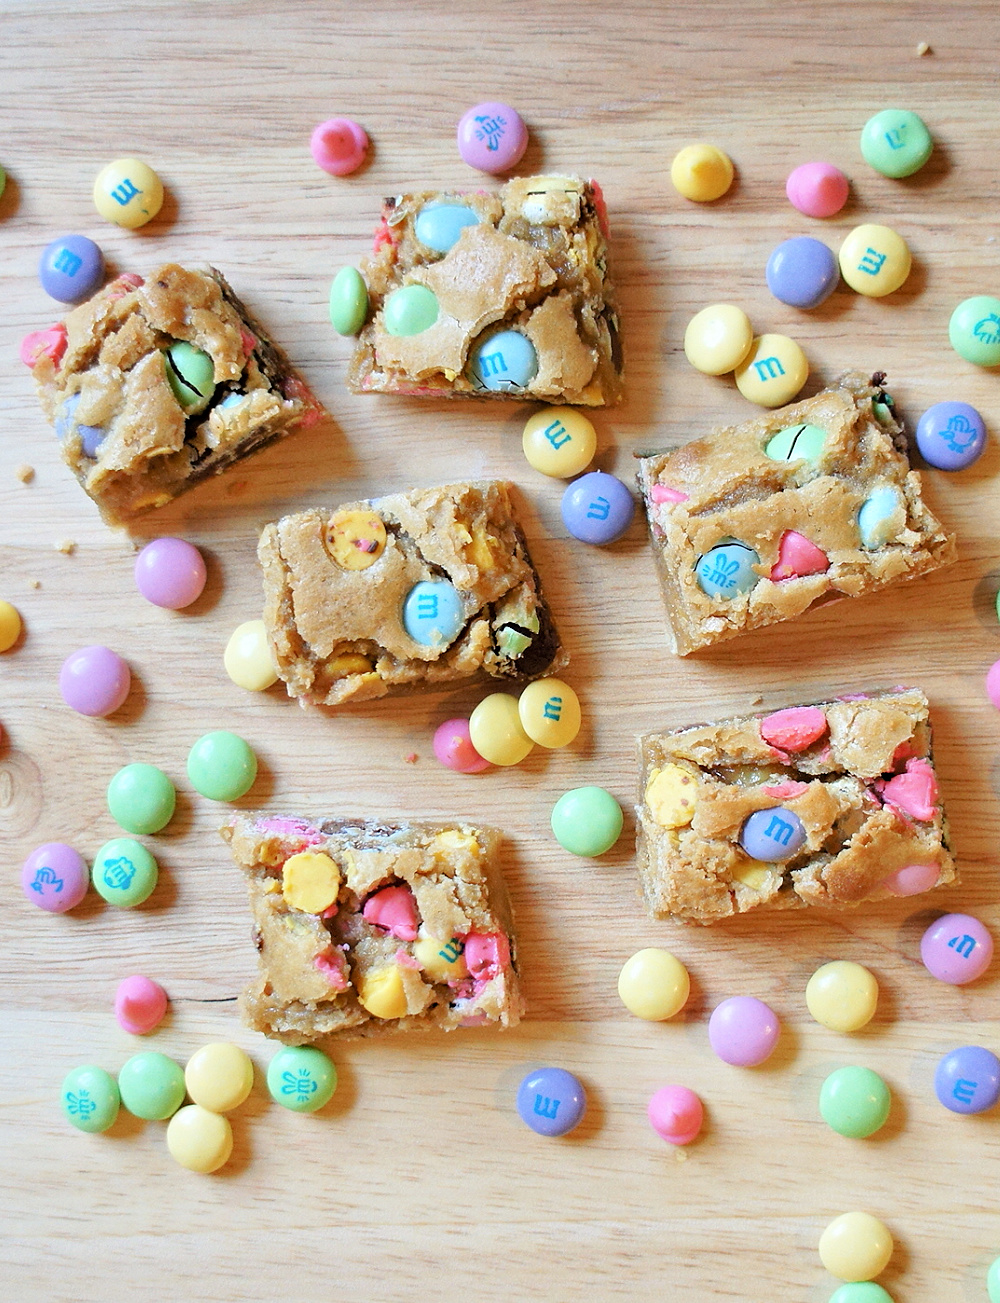 M&M Blondie Bars Recipe for Easter